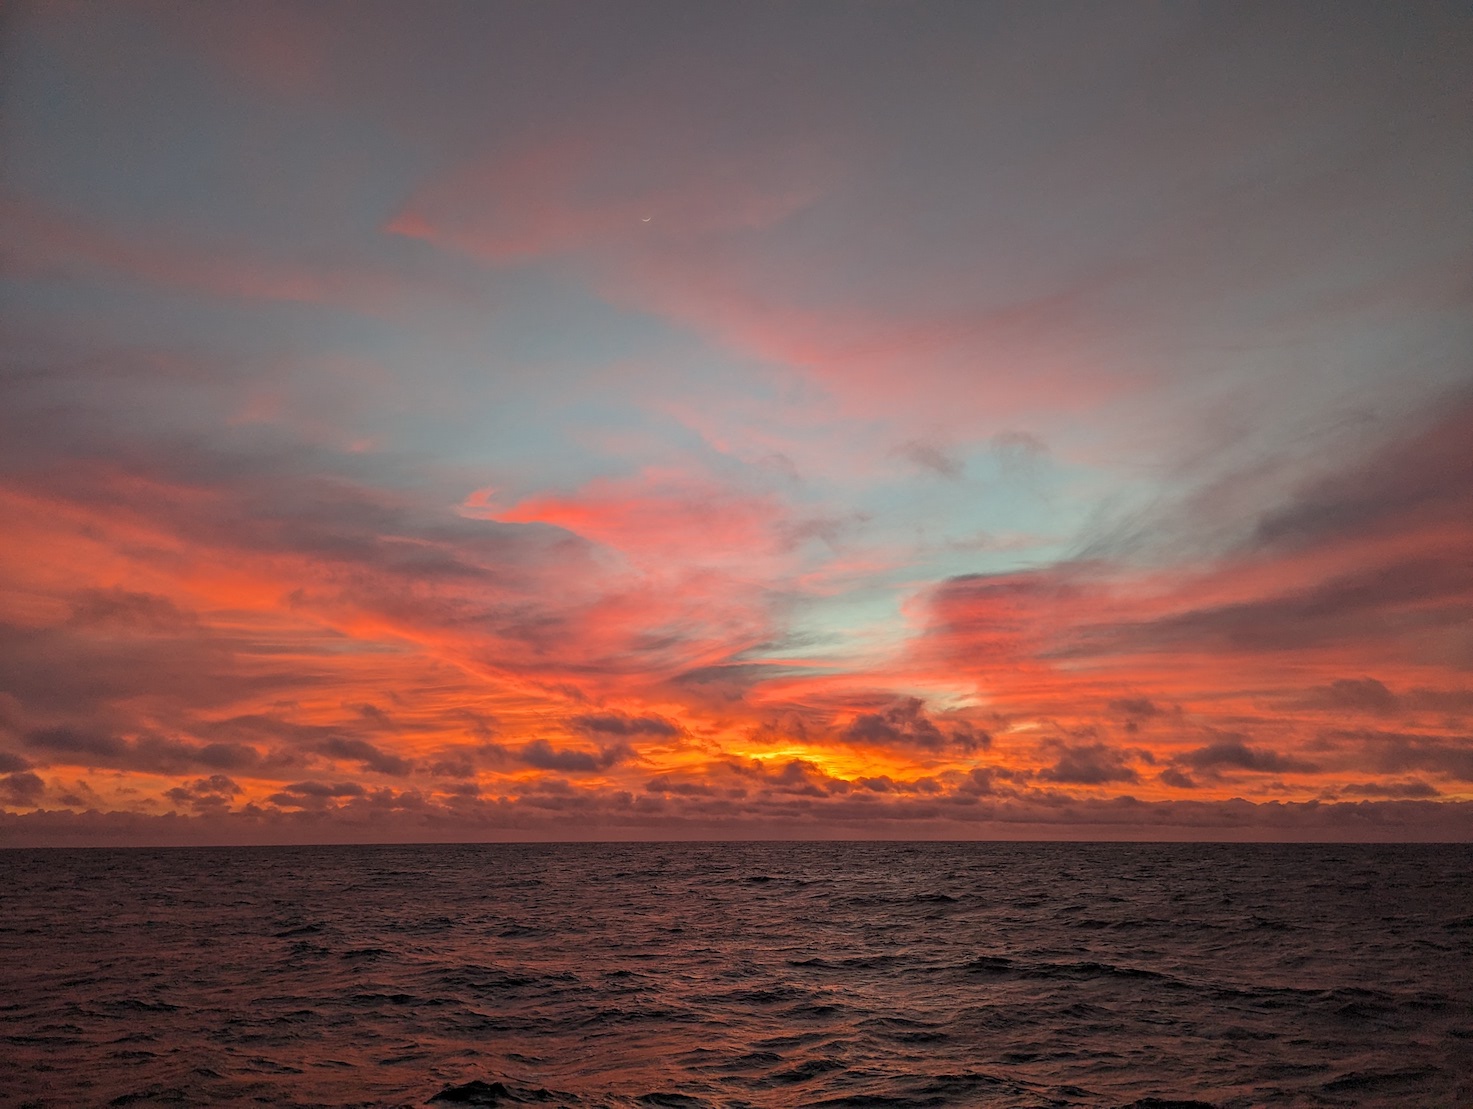 phenomenally colorful sunset over the ocean with streaky clouds